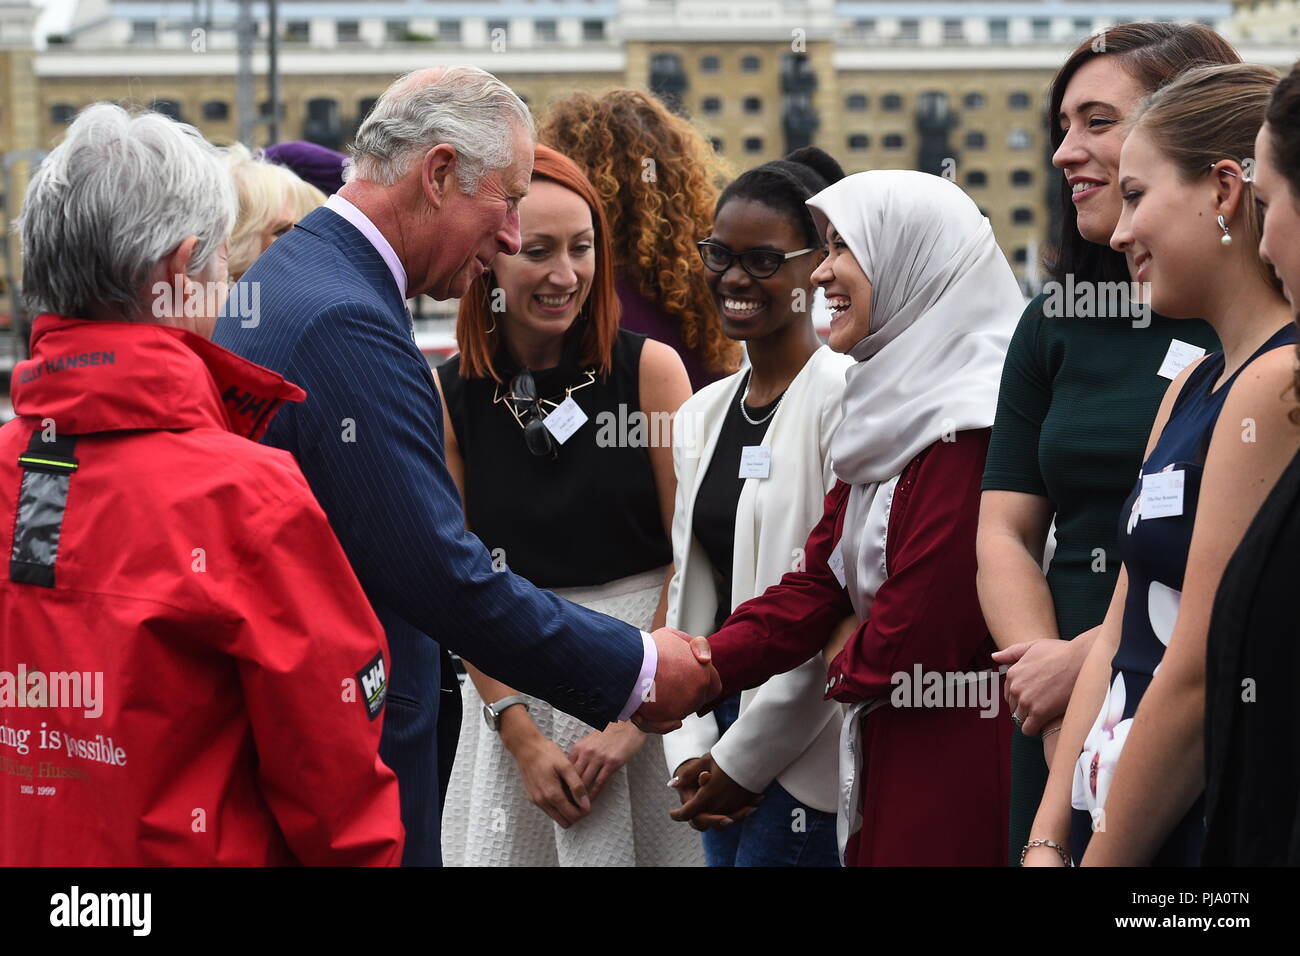 The Prince of Wales meets representatives and beneficiaries of the Maiden Factor charity during a visit at HMS President in London, to see the yacht 'Maiden' used by the first all-female crew and skippered by Tracy Edwards, to sail in the Whitbread Round the World Race, in which they finished second in 1990. Stock Photo